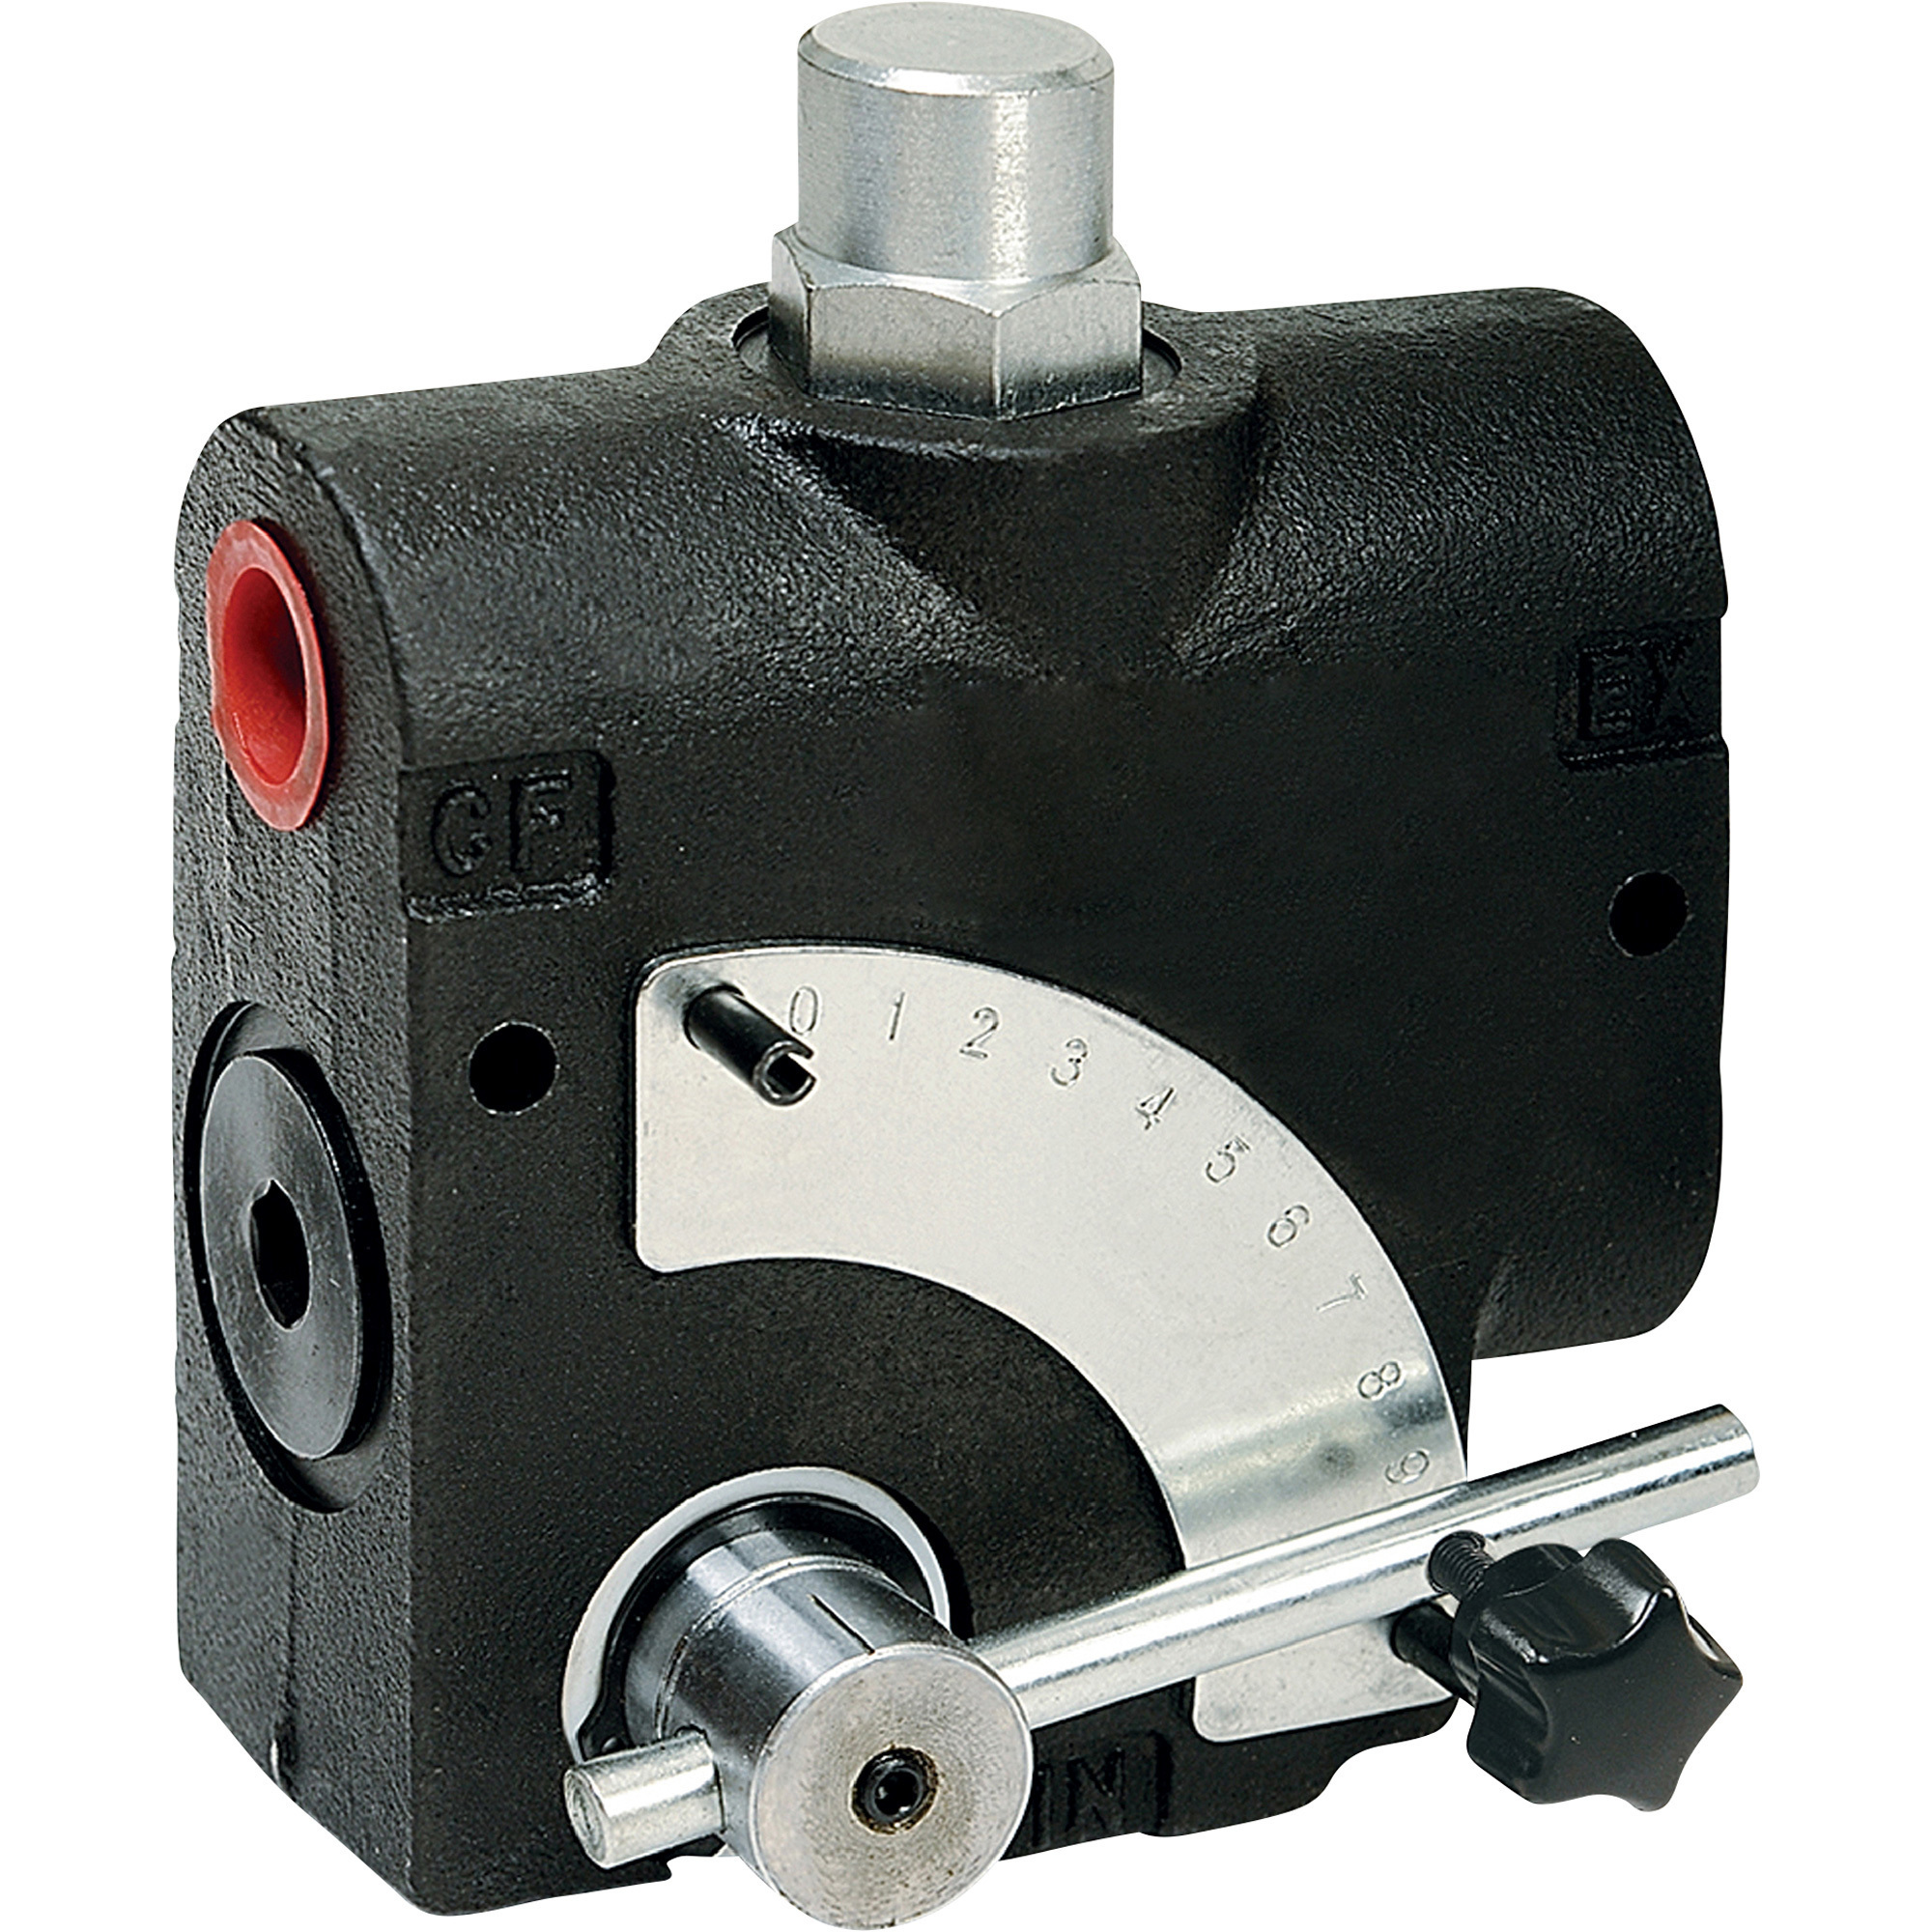 HydroWorks Side-Ported Flow Control Valve with Relief Valve, SAE 12 ports, 30 GPM, Model FC309S21